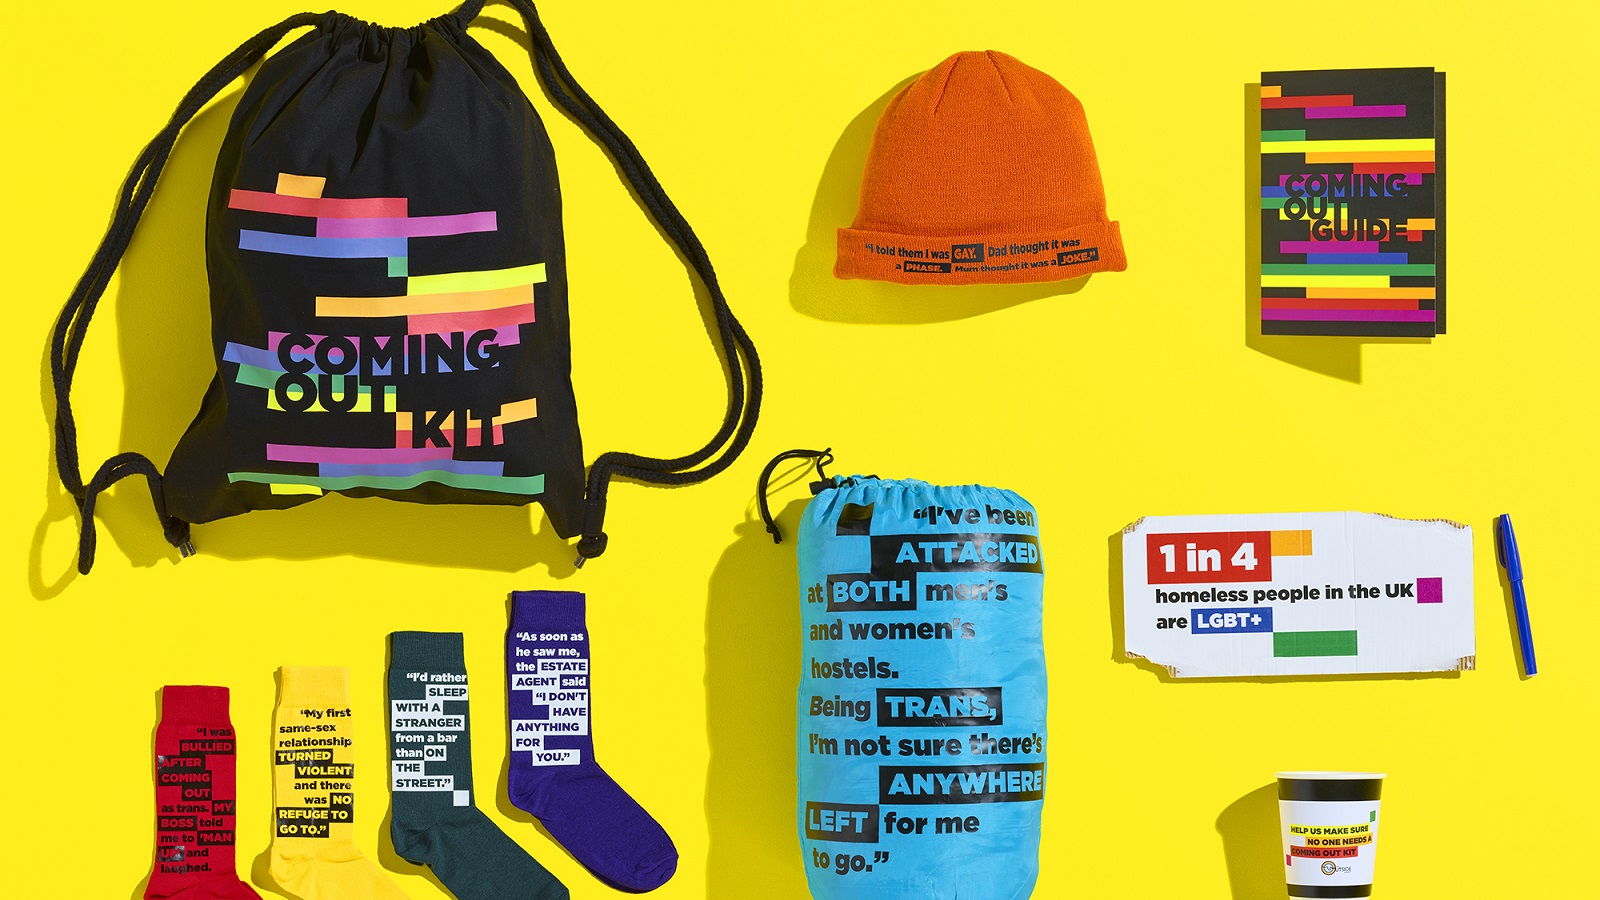 This Coming Out Kit Complements the LGBTIQ+ movement’s Statement